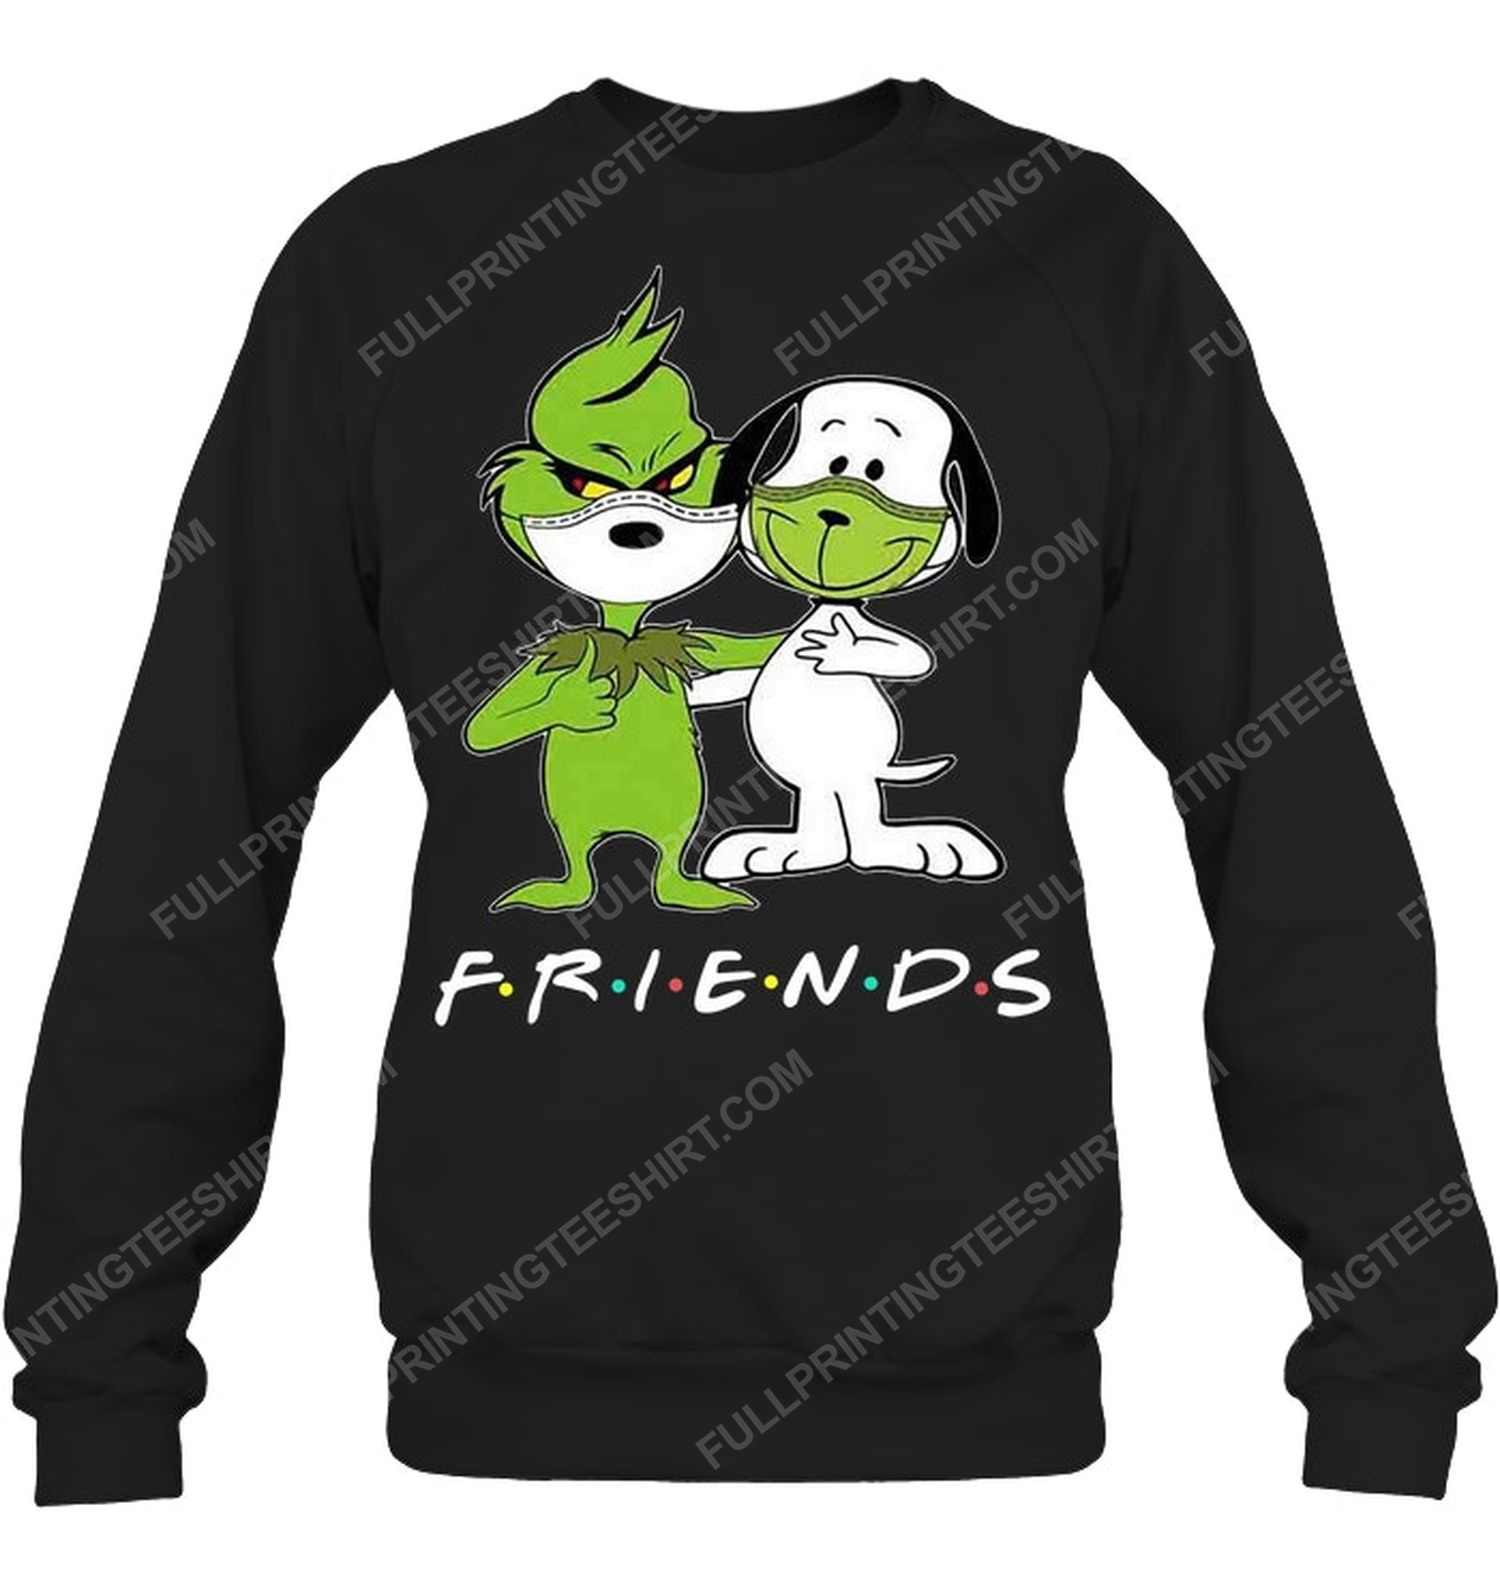 The grinch and snoopy friends tv show sweatshirt